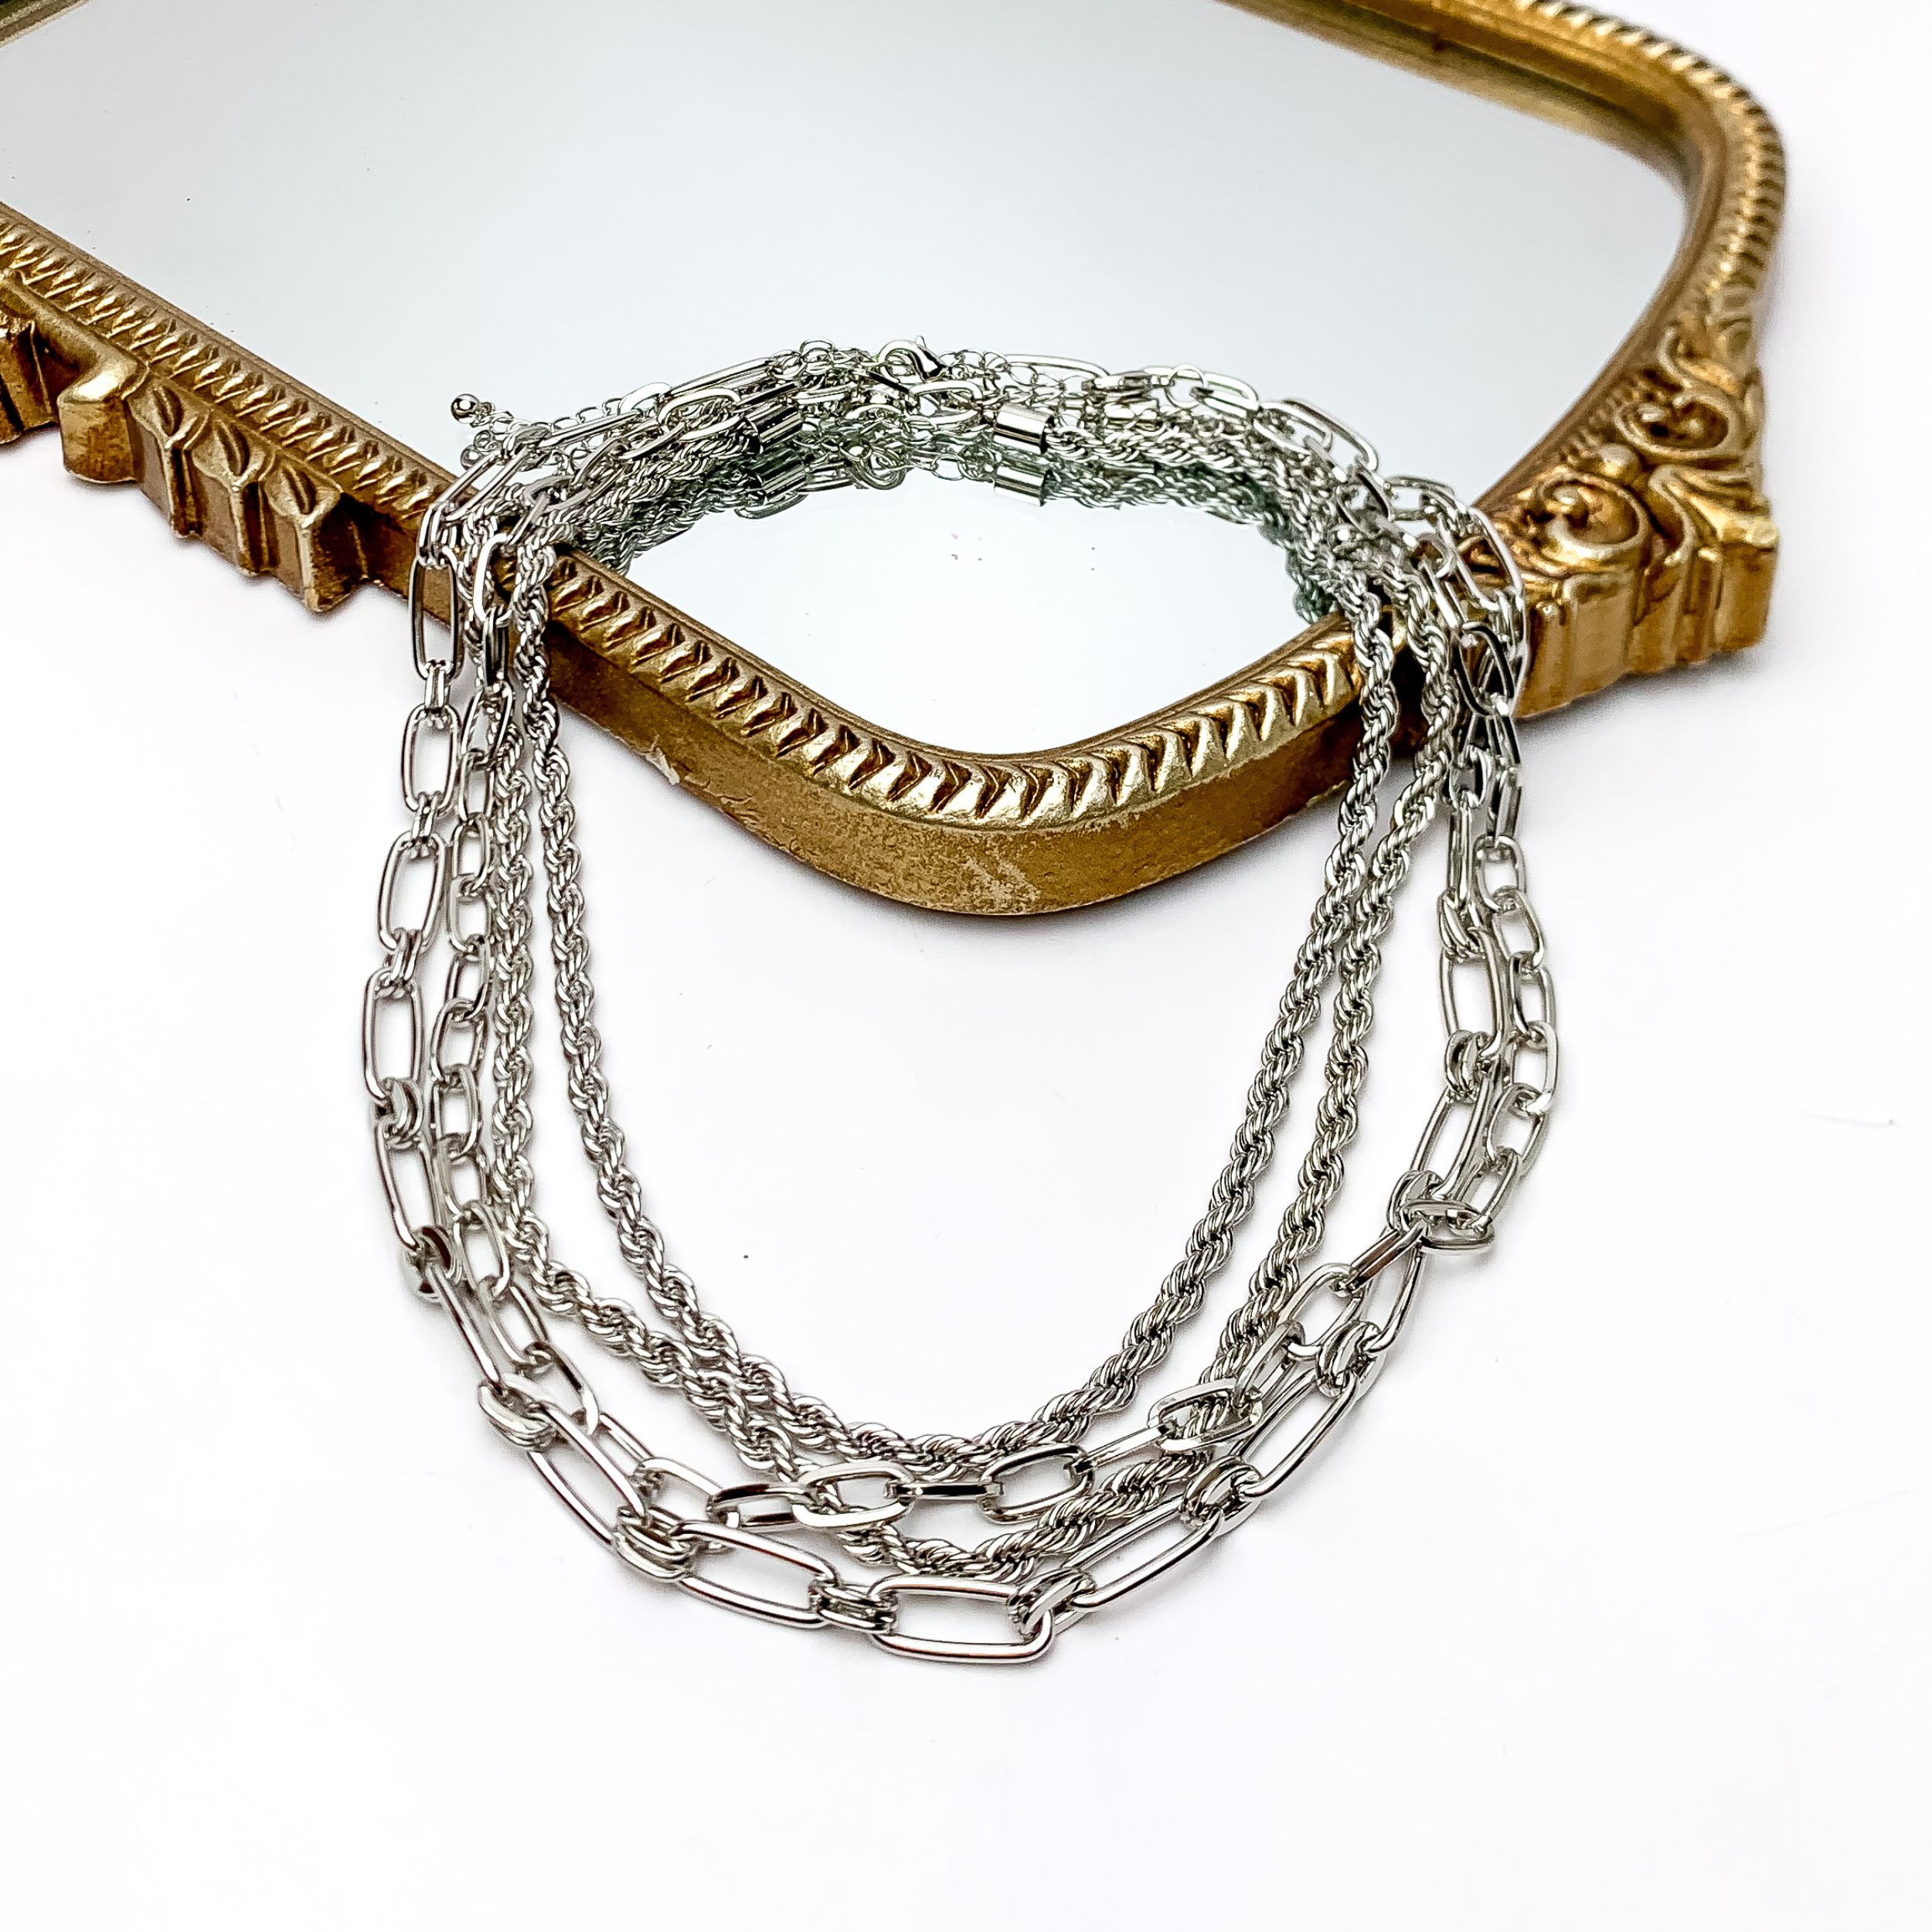 Sunday Style Silver Tone Chain Necklace. Pictured on a white background with part of the necklace on a gold framed mirror.